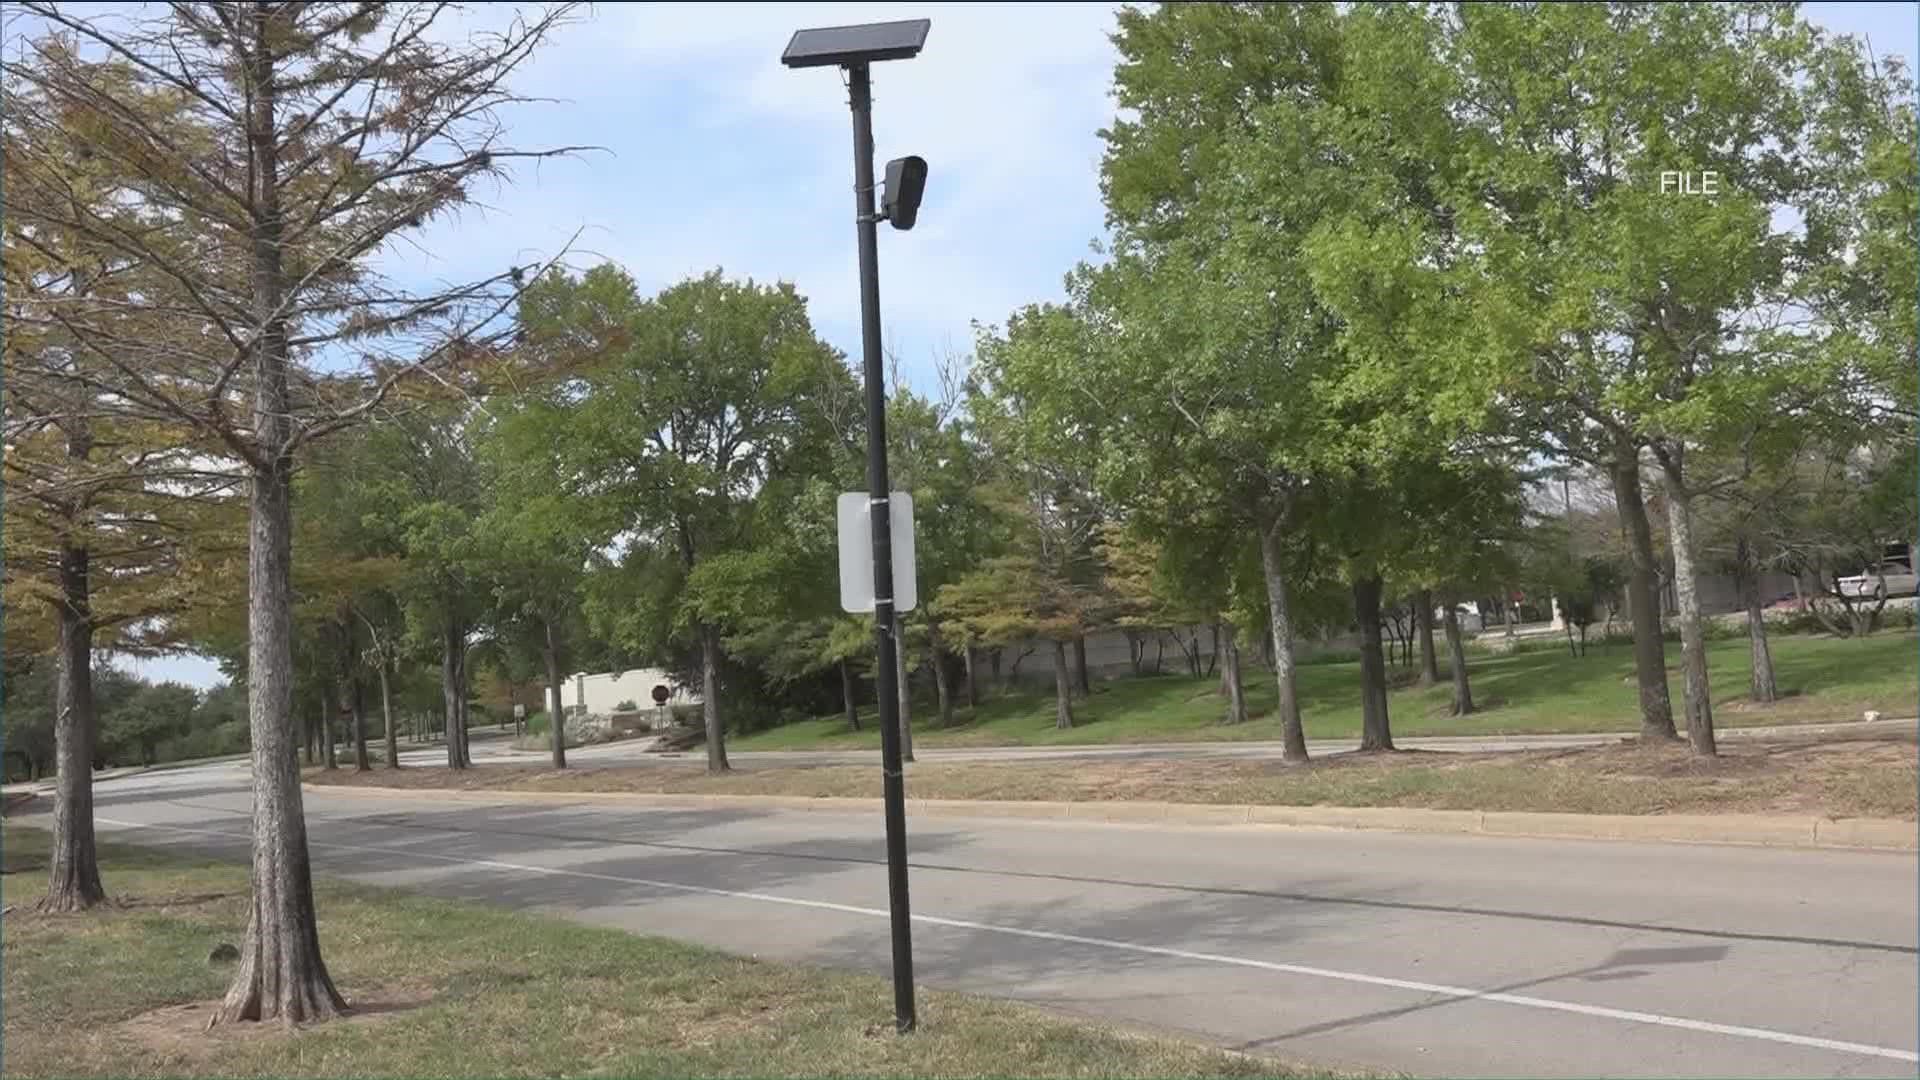 Travis County commissioners rejected a proposal that would have put more cameras on public roads.